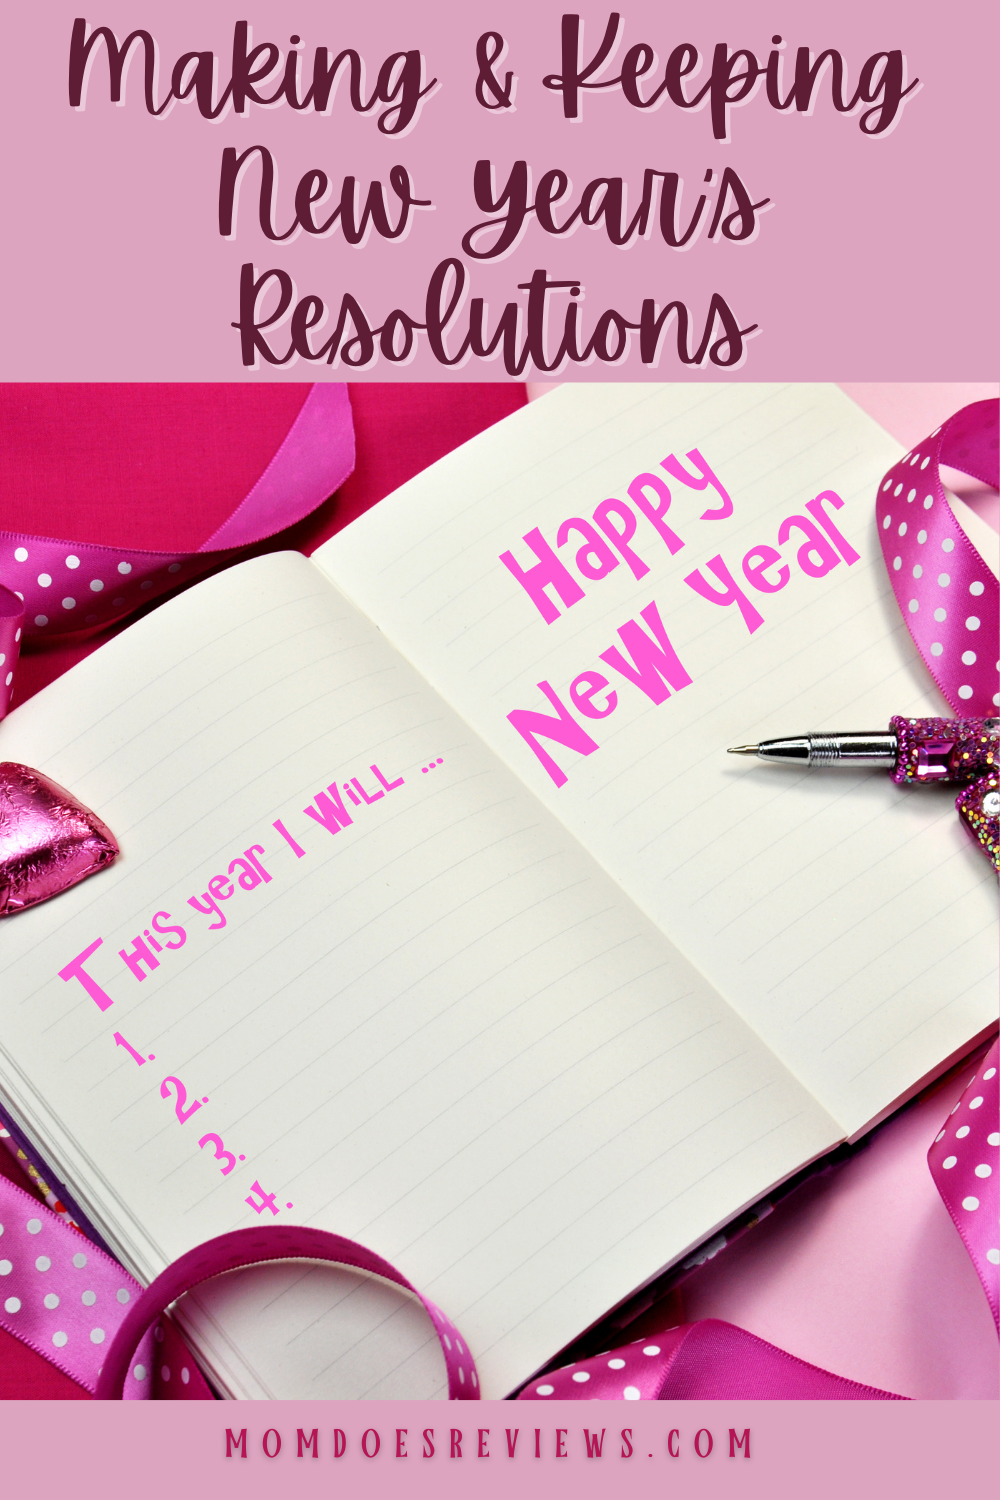 Making & Keeping Productive New Year’s Resolutions